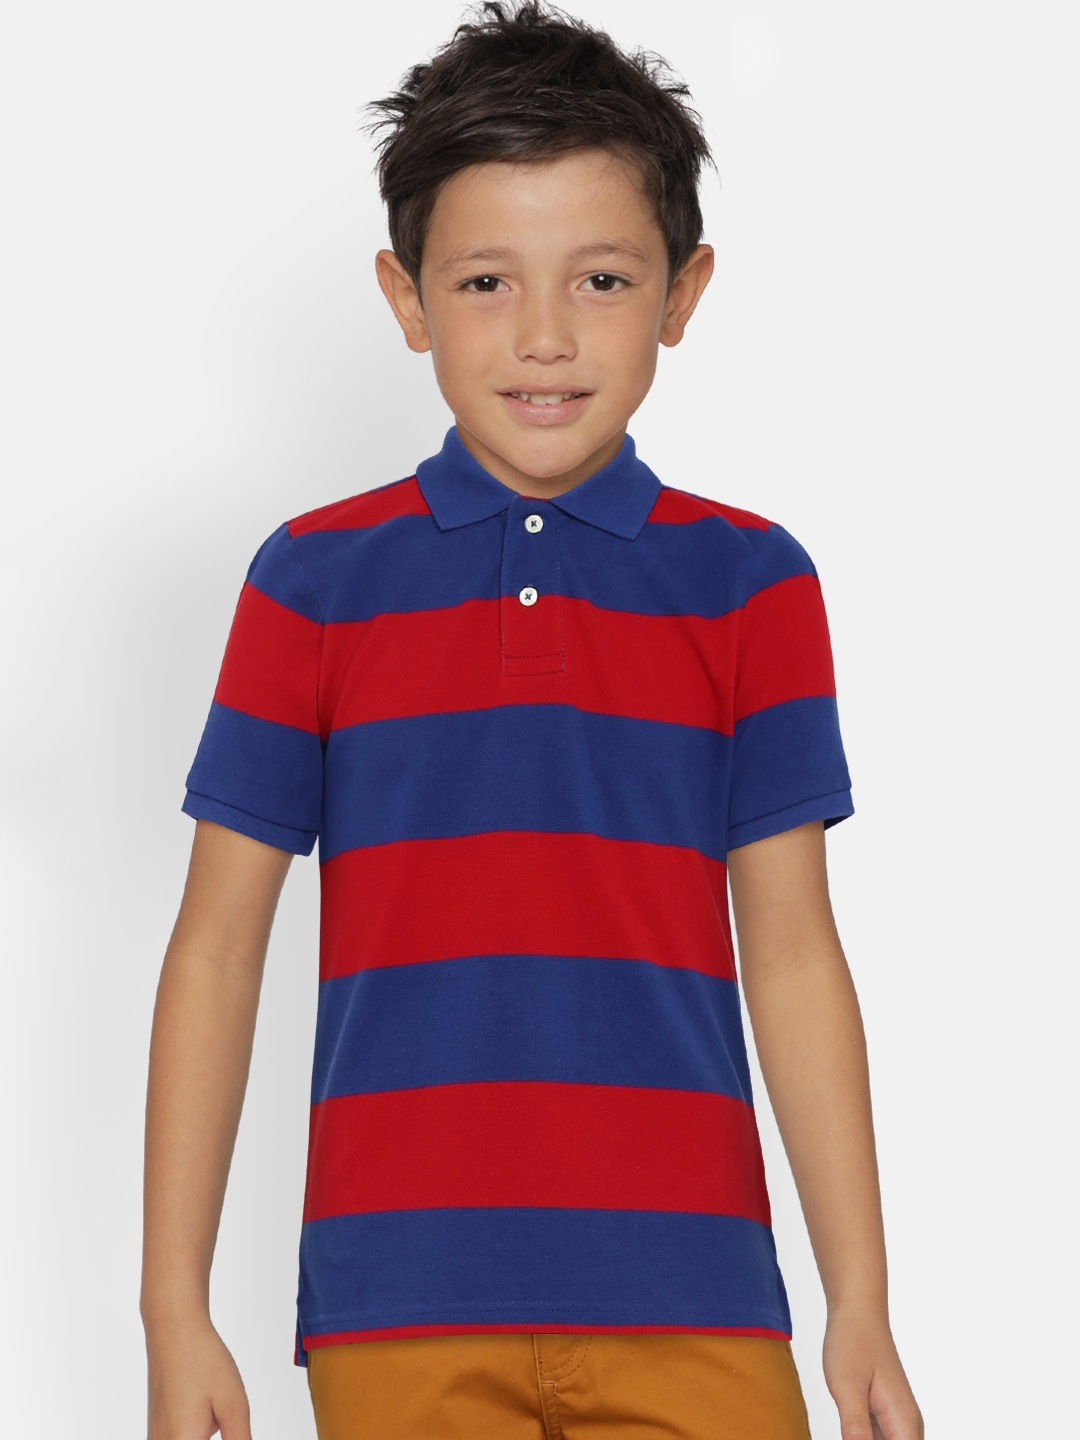 Size M Red Navy or White! NWT New Boy's Gap Striped Polo Shirts 